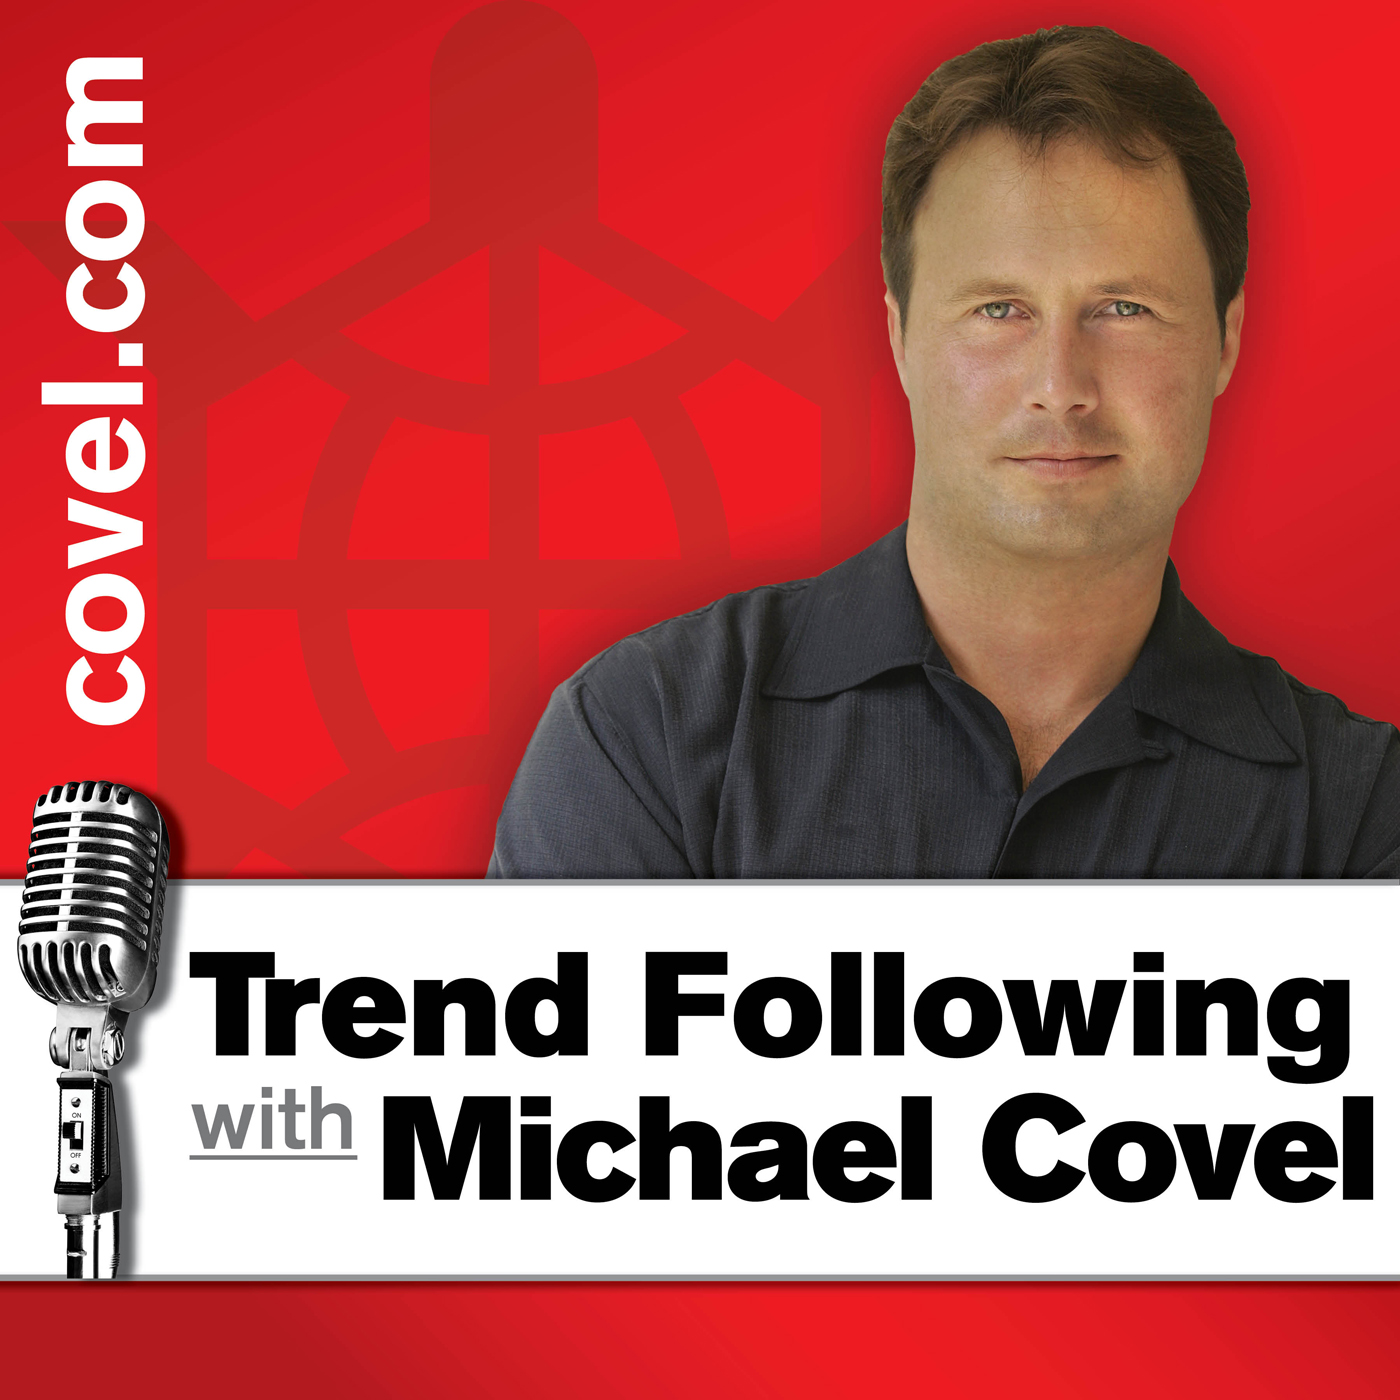 Interview with Michael Covel of Trend Following